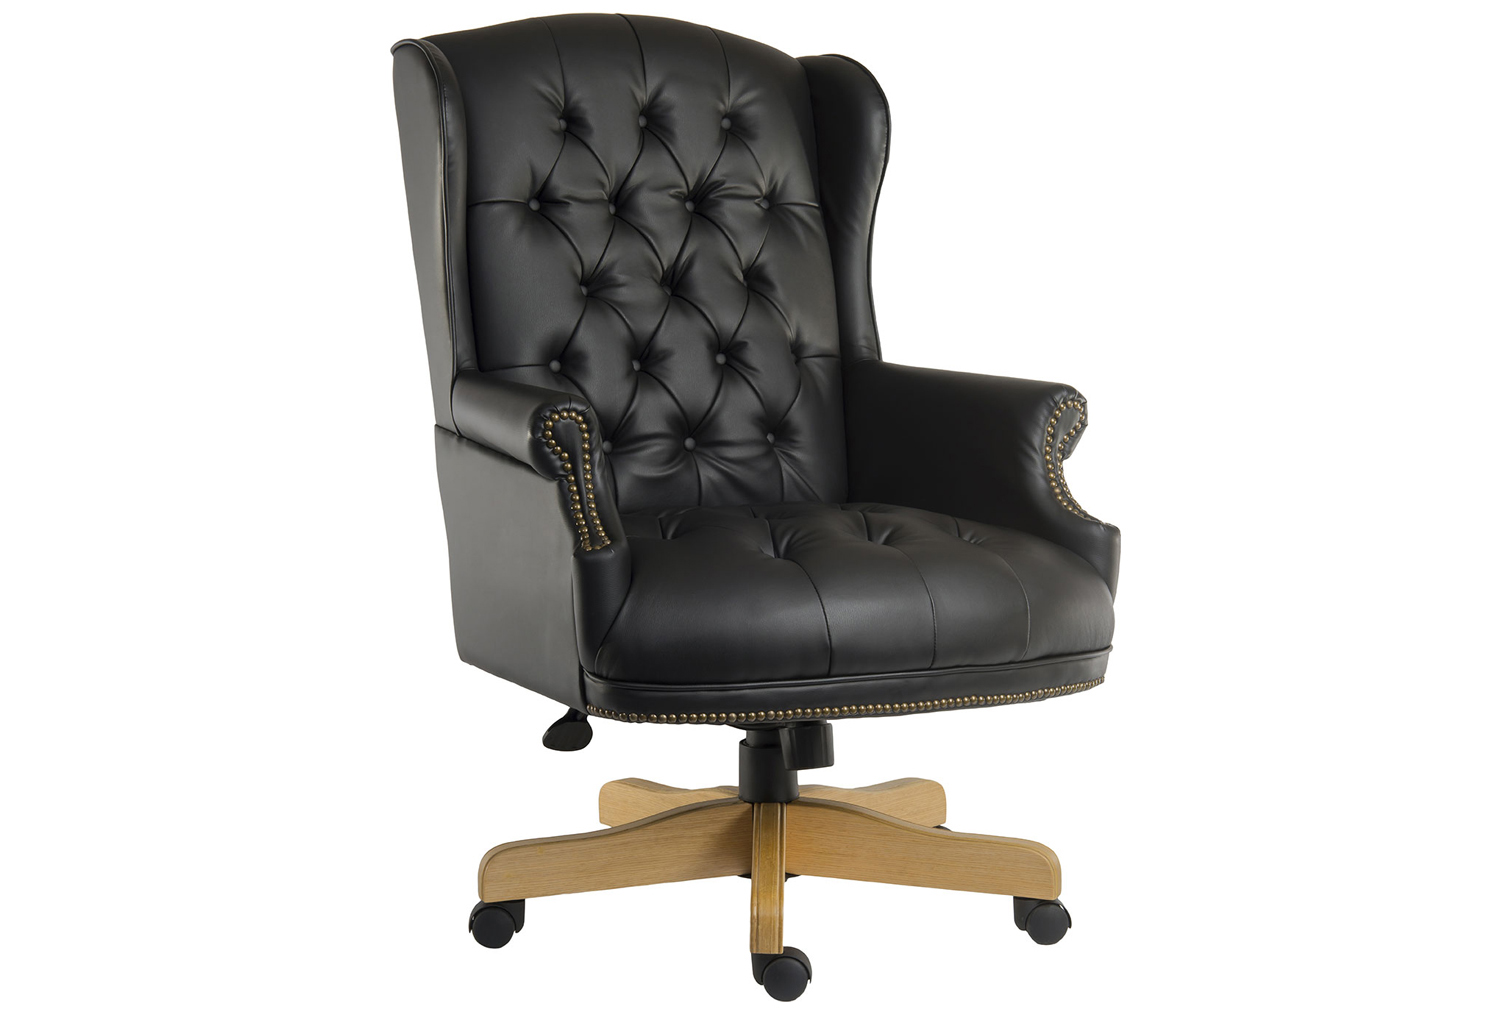 Office Chairman Swivel Office Chair Black, Fully Installed